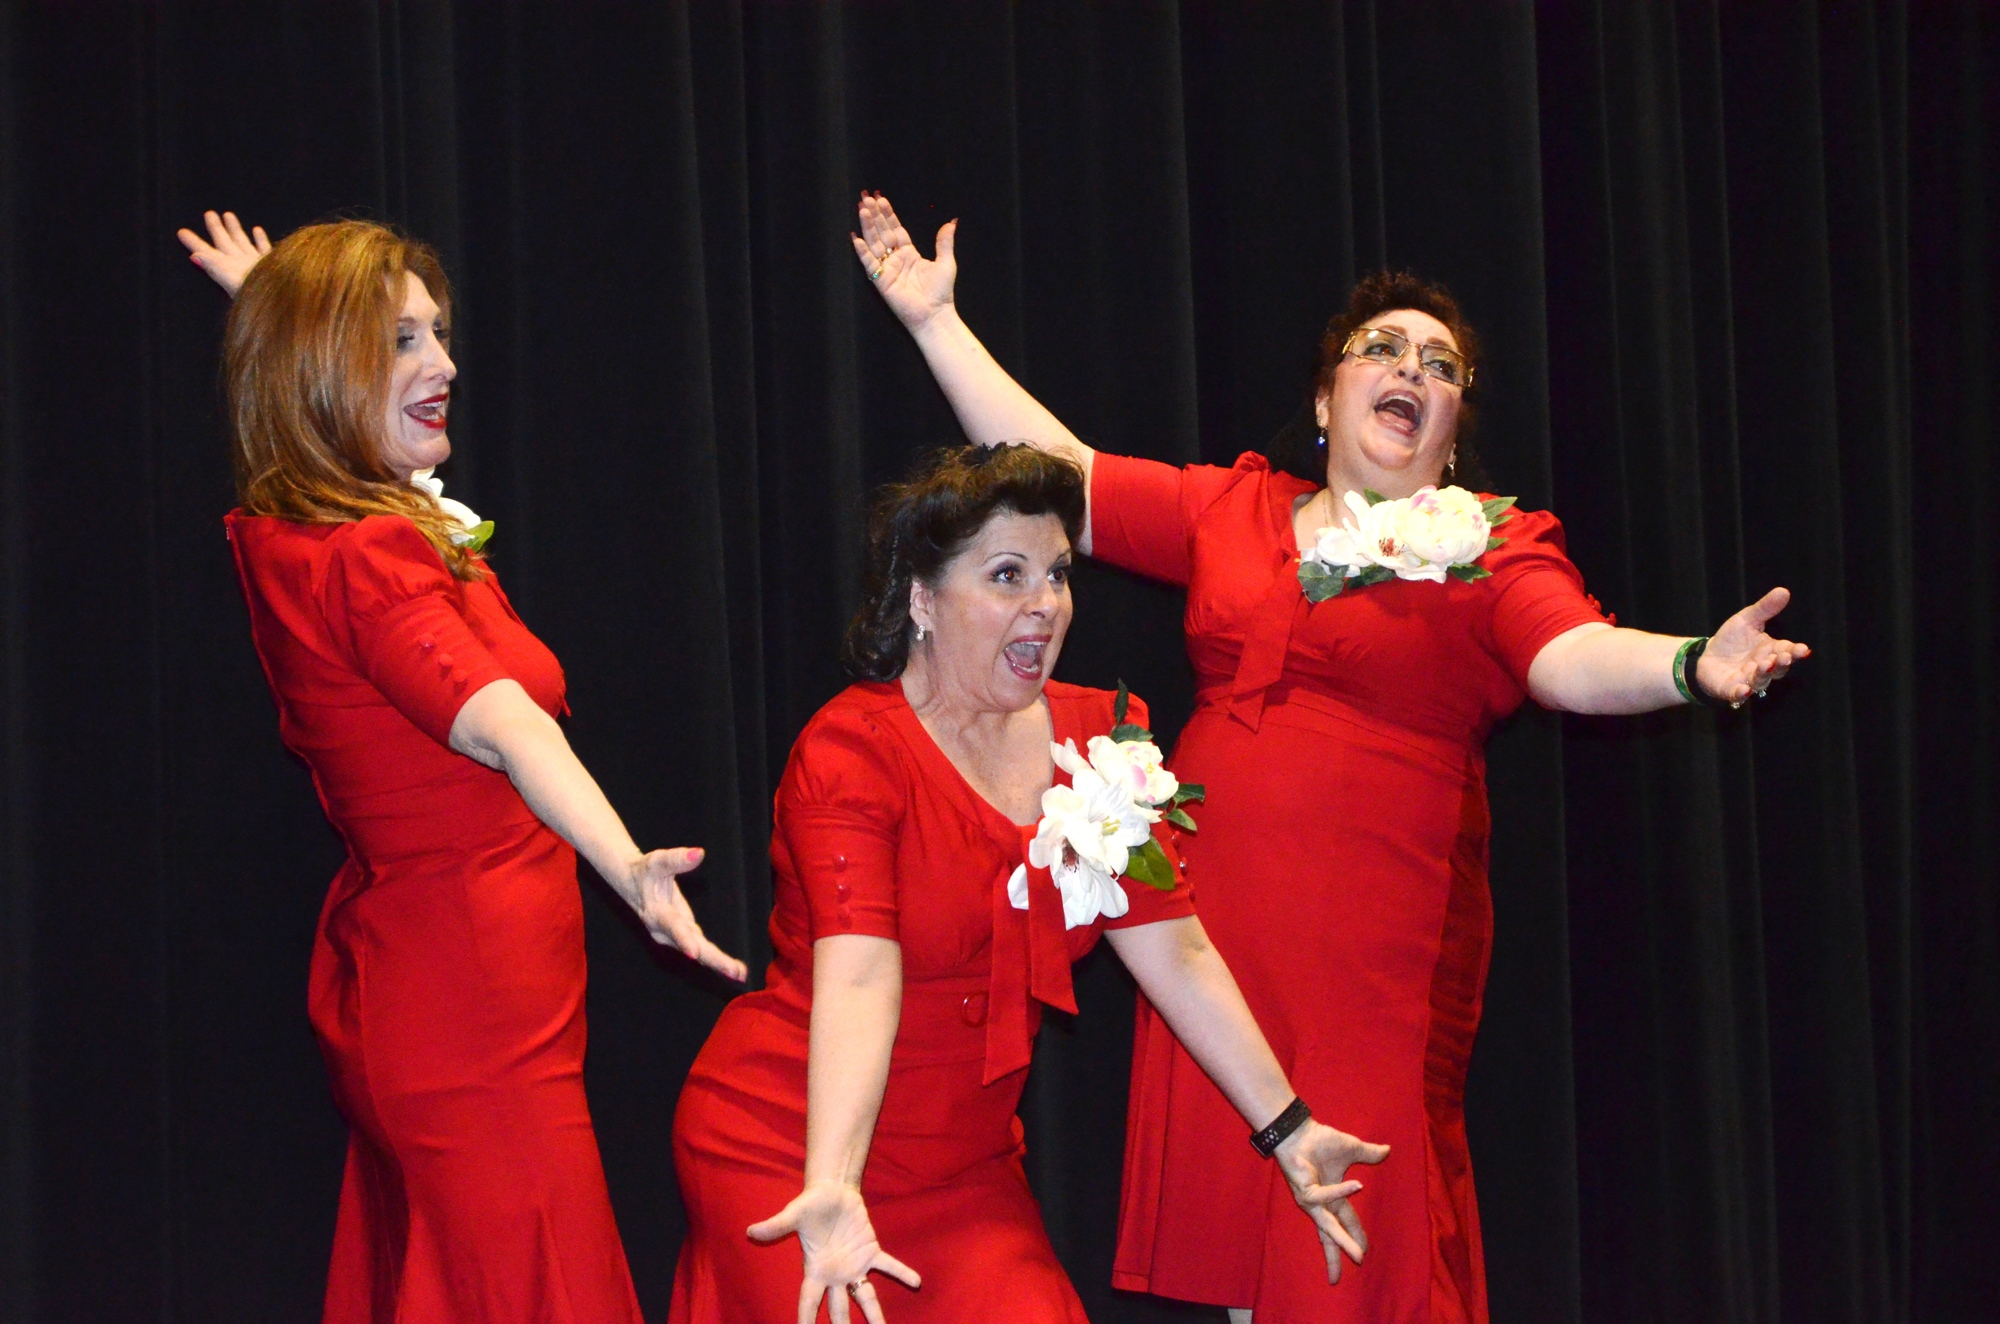 The “Andrews Sisters.”Photos by Wayne Grant